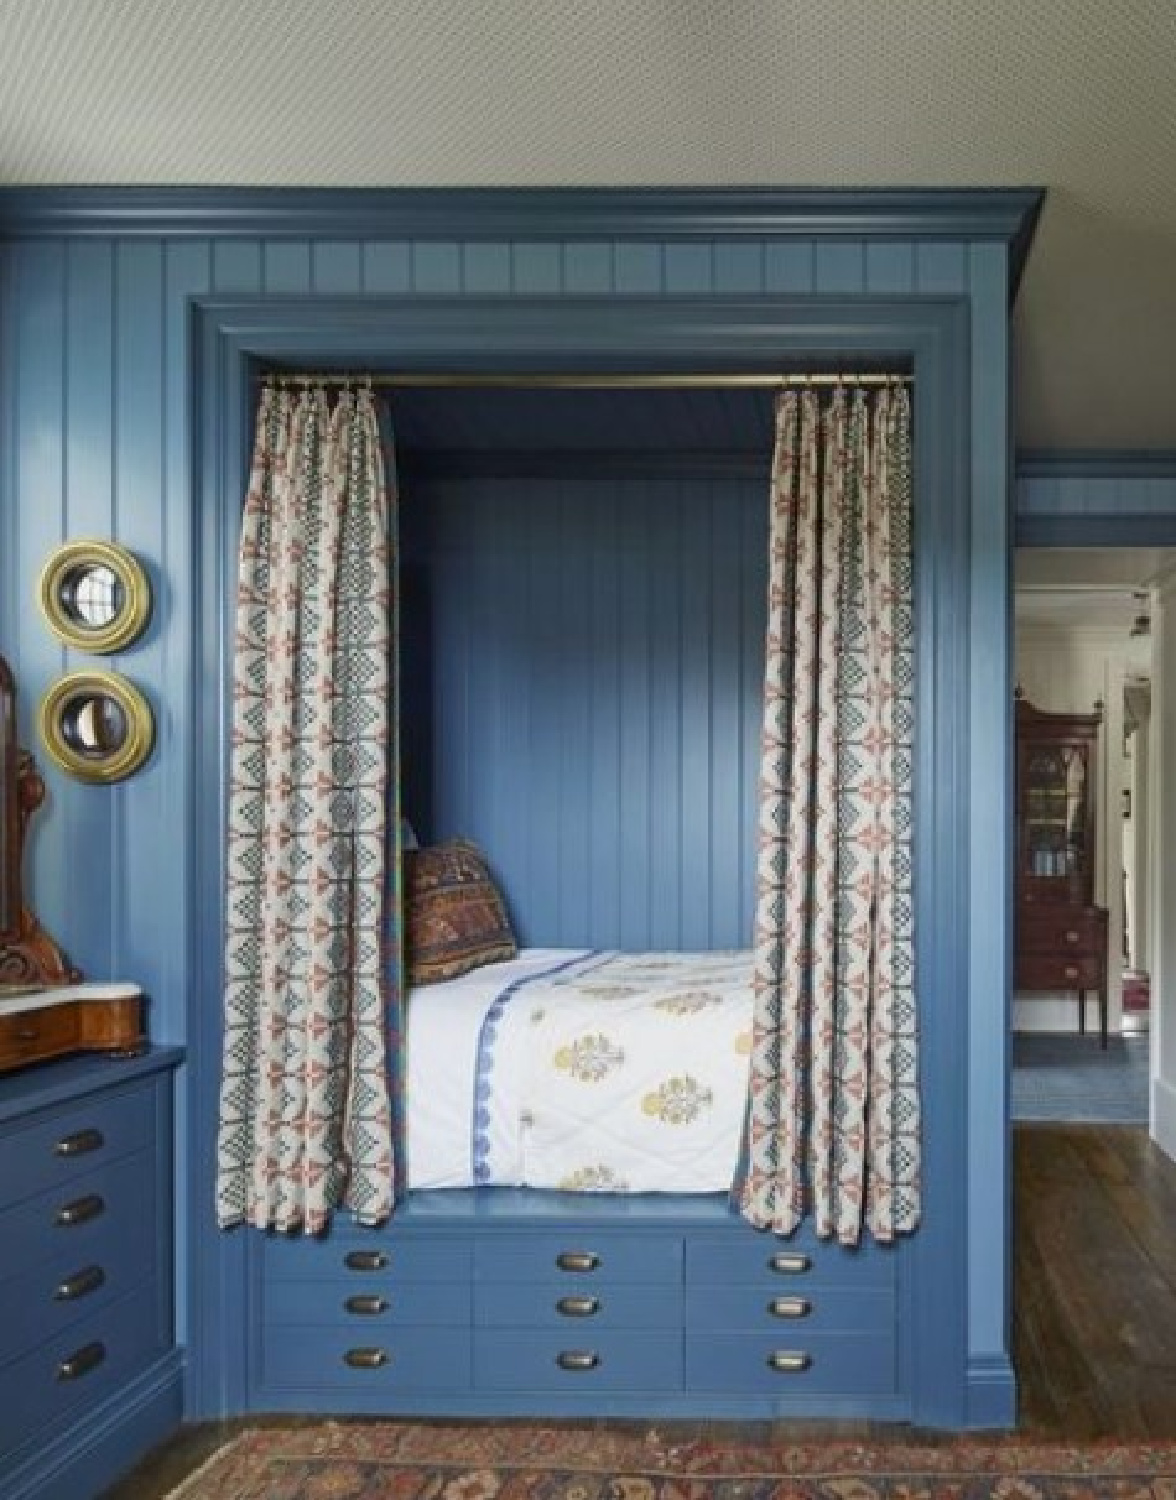 Blue paneled bed nook with curtains in a beautiful interior - @theglampad. #bednooks